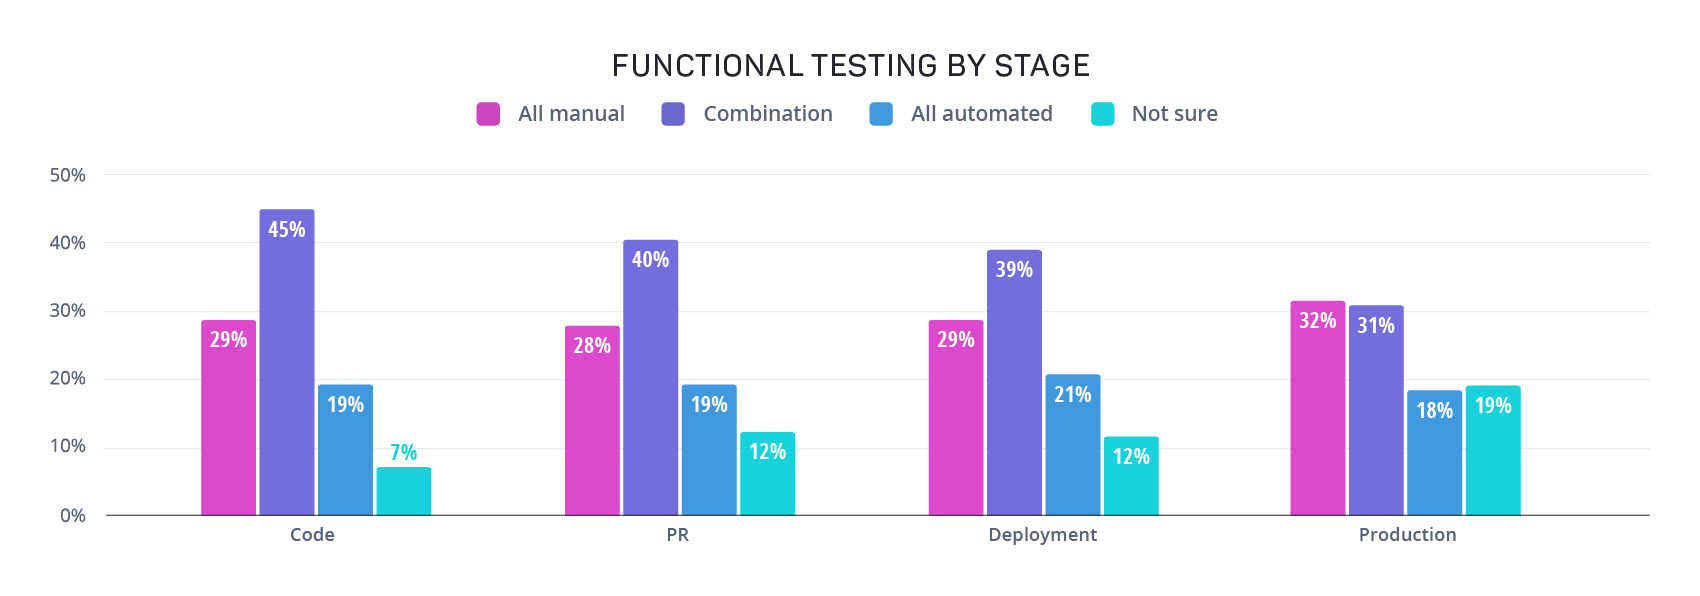 graph-functional-testing-by-phase-07JUL2021